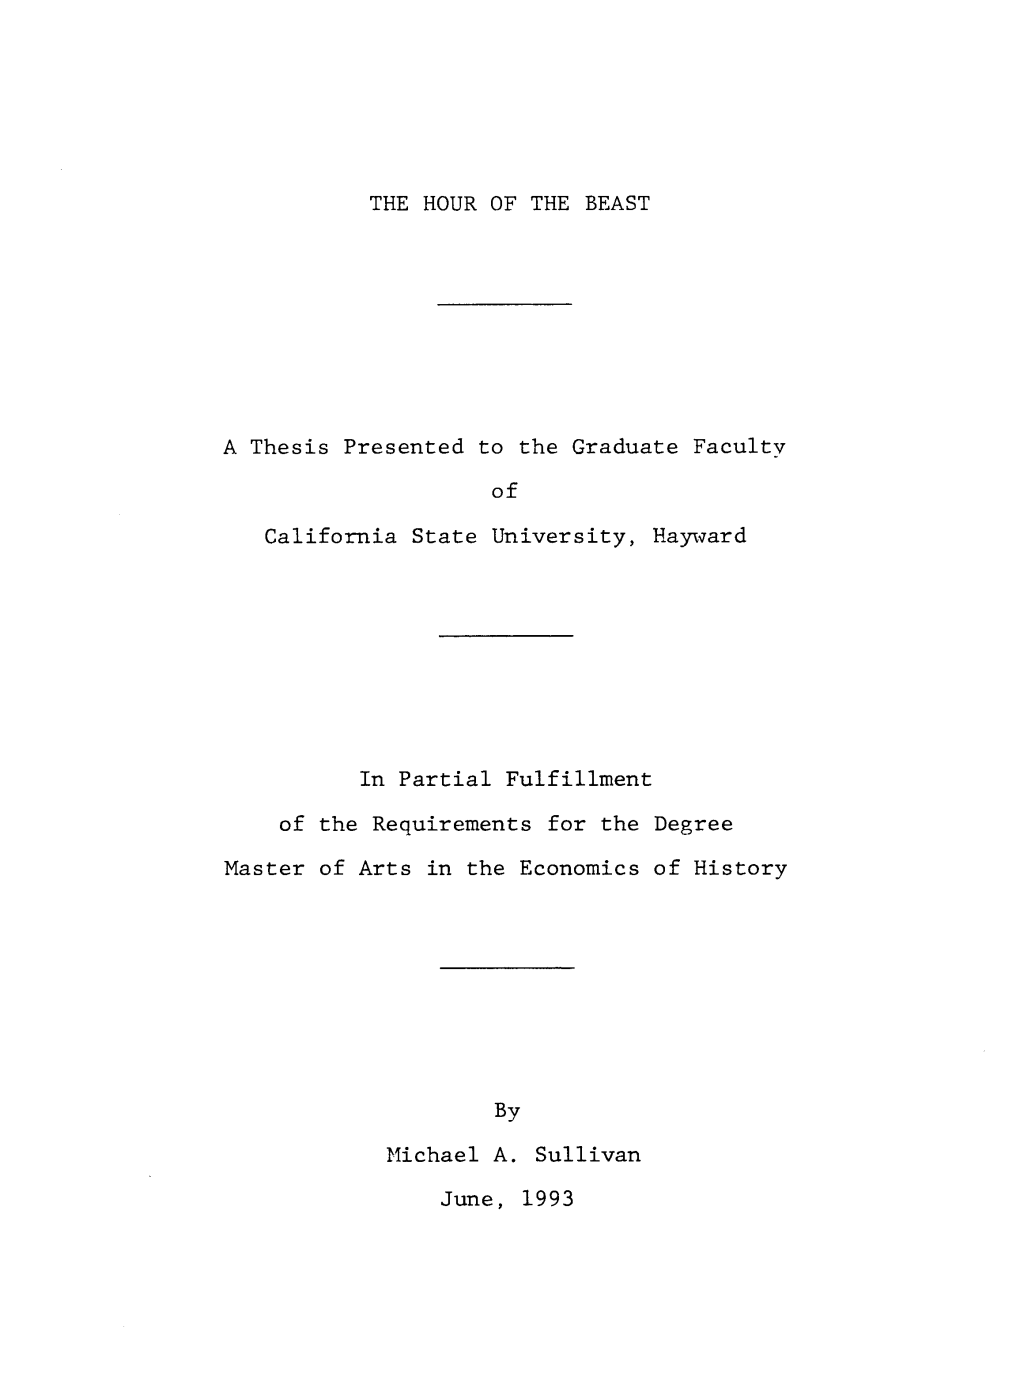 THE HOUR of the BEAST a Thesis Presented to the Graduate Faculty